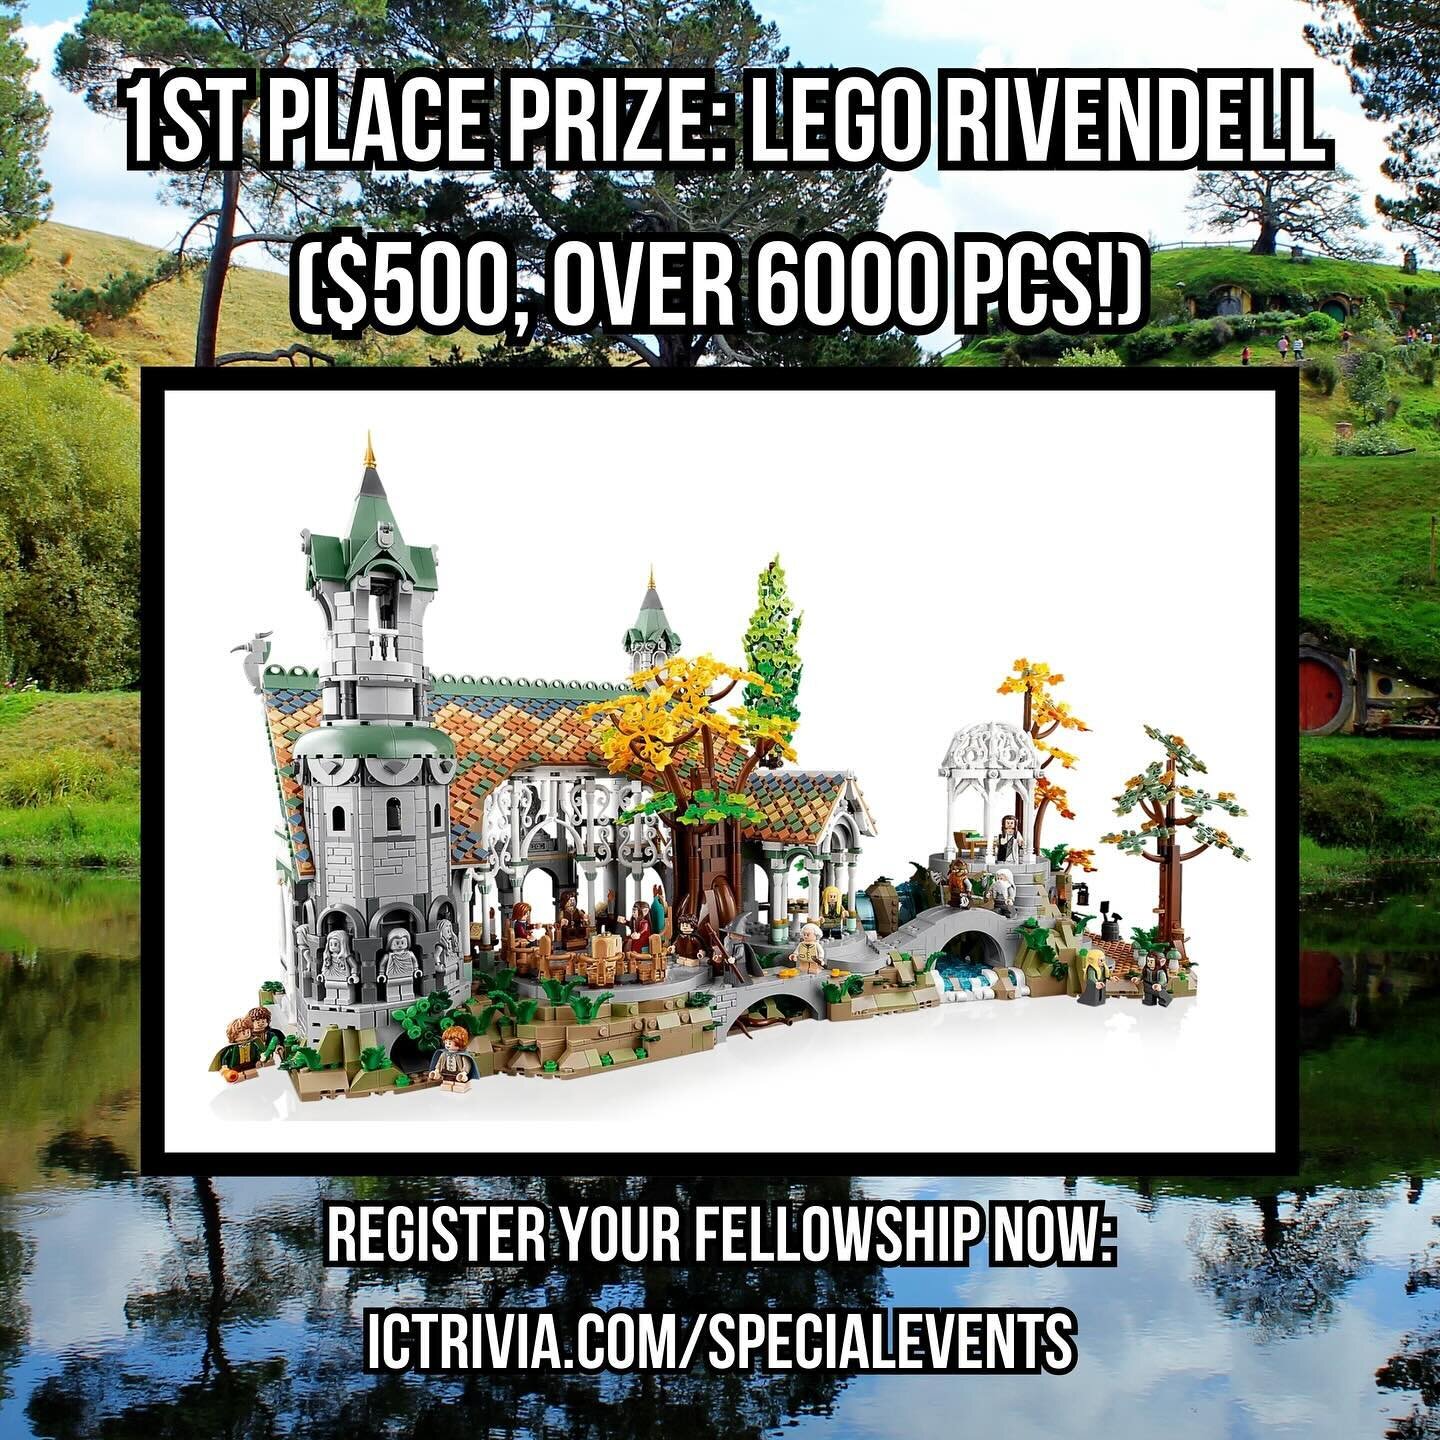 We&rsquo;ve been waiting a long, long time for this. We&rsquo;re so excited to present to you, Lord of the Rings Trivia!

1st Place Prize is a LEGO Rivendell Set! Over 6000 pcs, and a $500 Value!

Early Bird Sign-Ups are available now! Sign up online